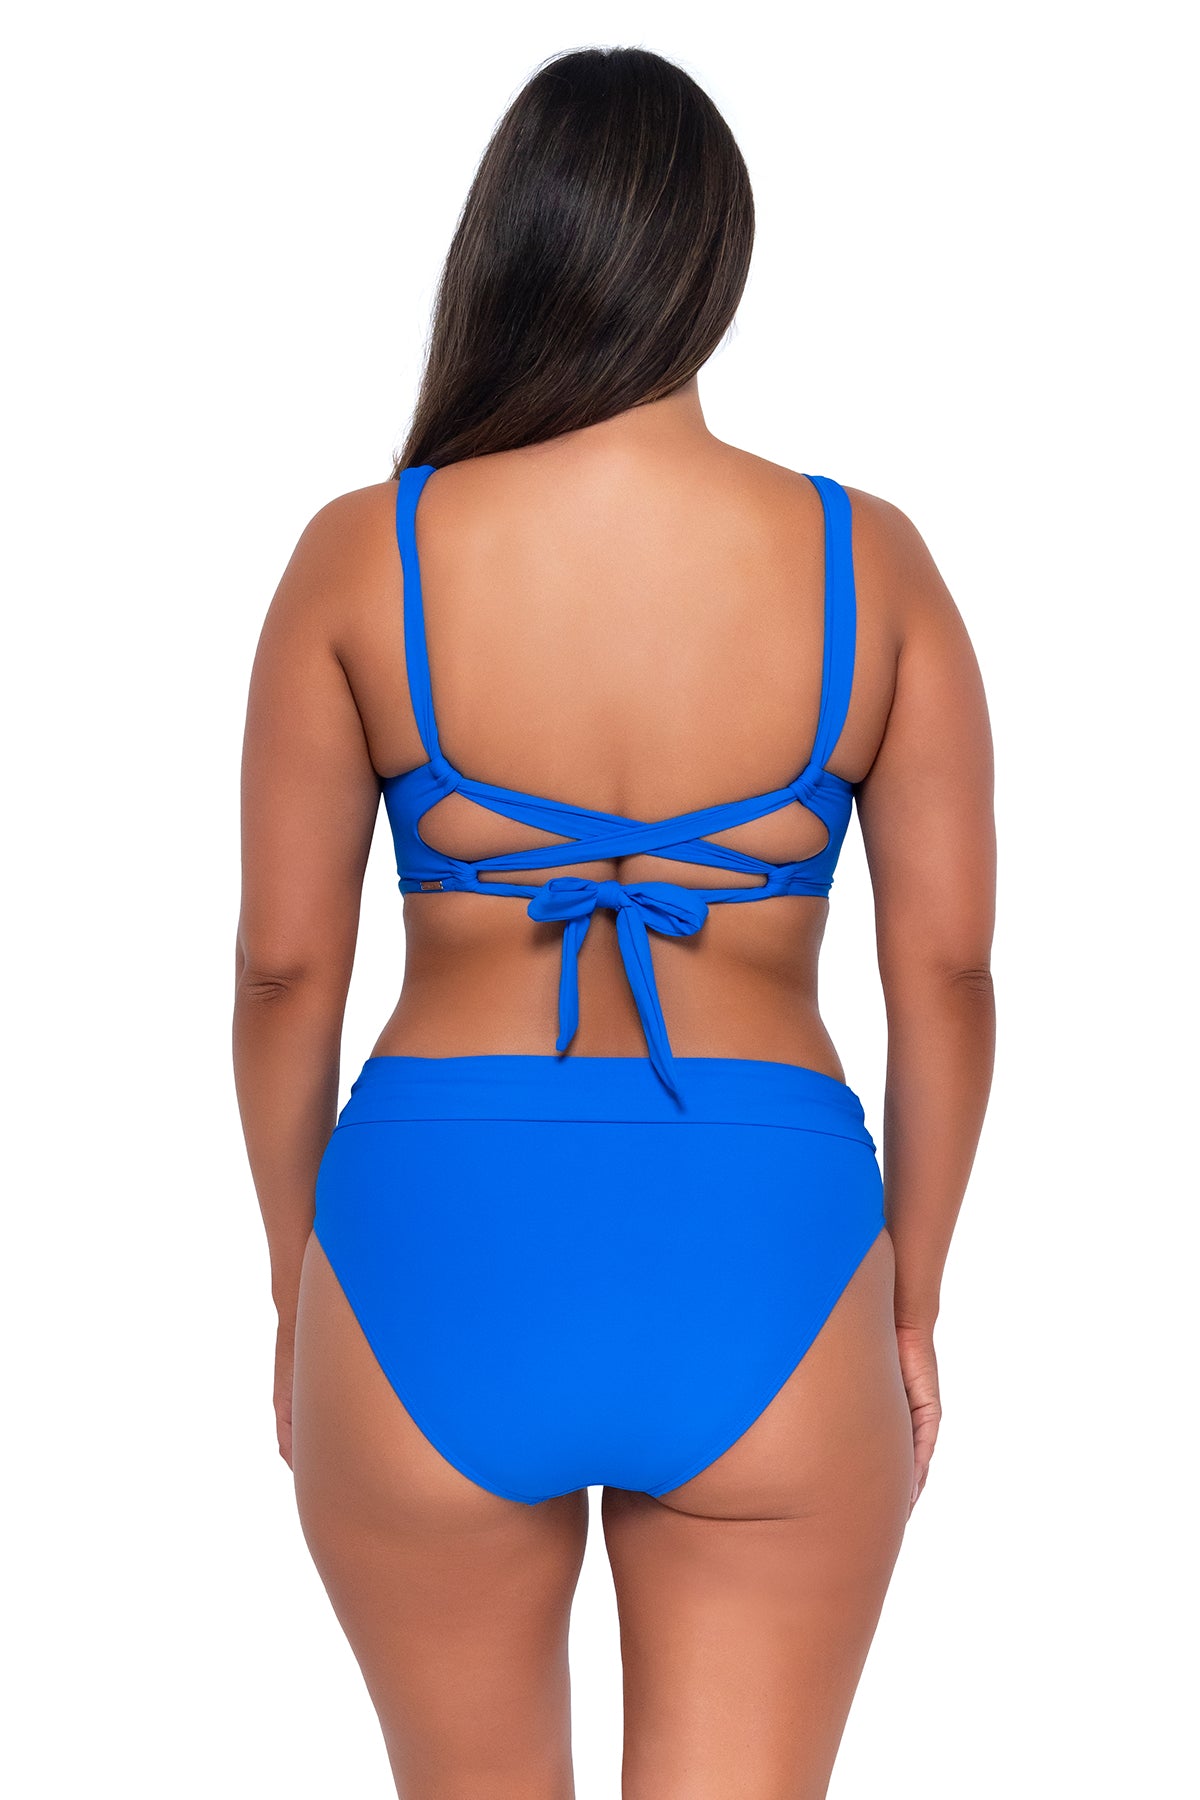 Back pose #1 of Nicky wearing Sunsets Electric Blue Hannah High Waist Bottom with matching Elsie Top underwire bikini